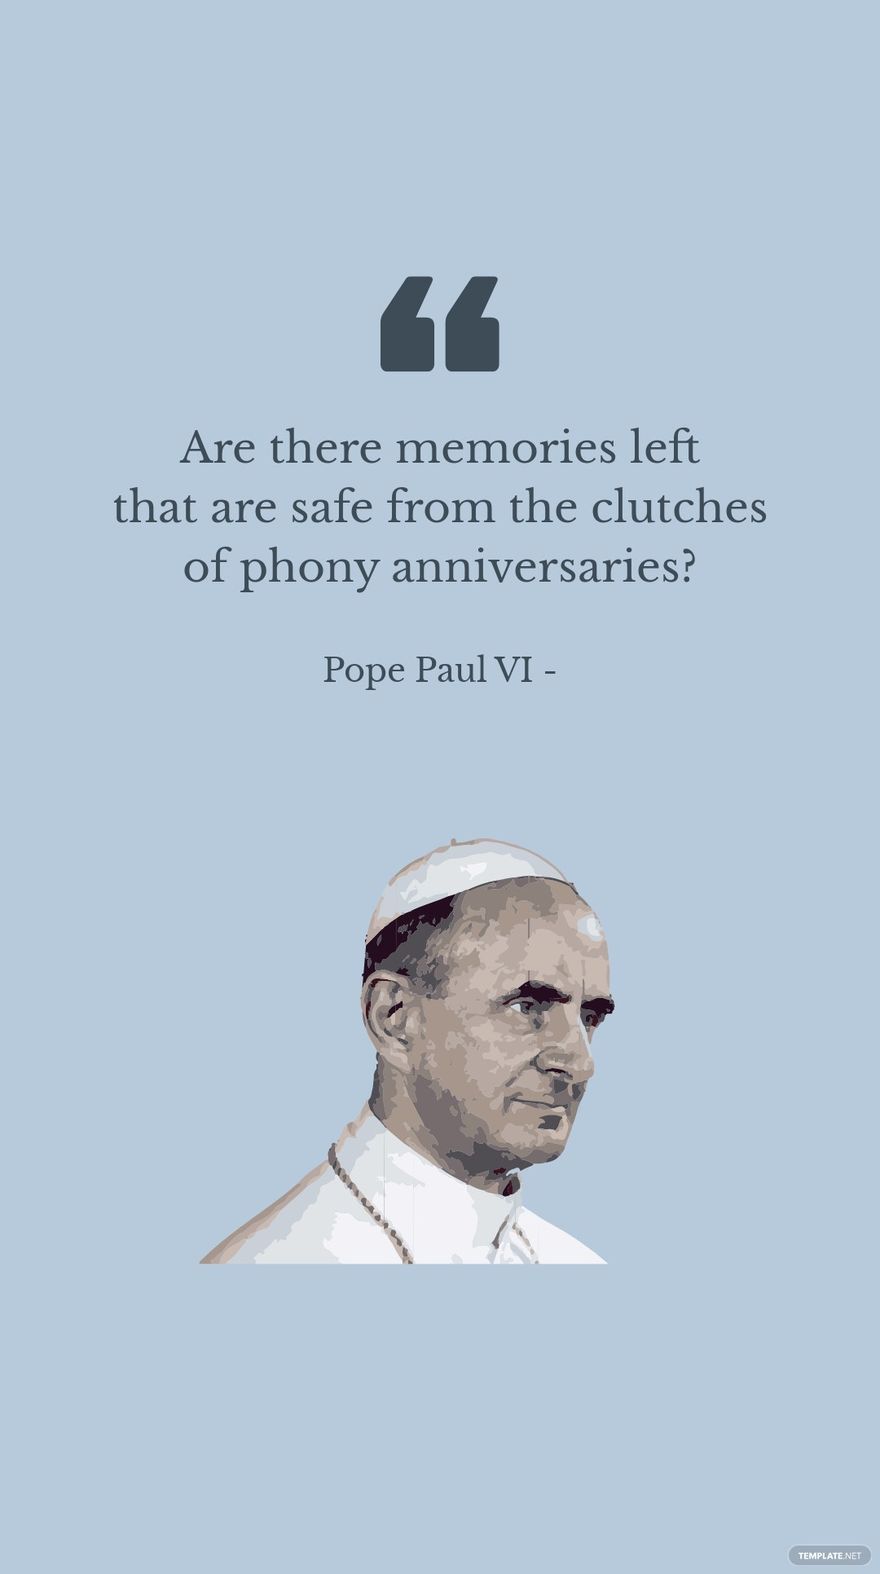 Free Pope Paul VI - Are there memories left that are safe from the clutches of phony anniversaries? in JPG